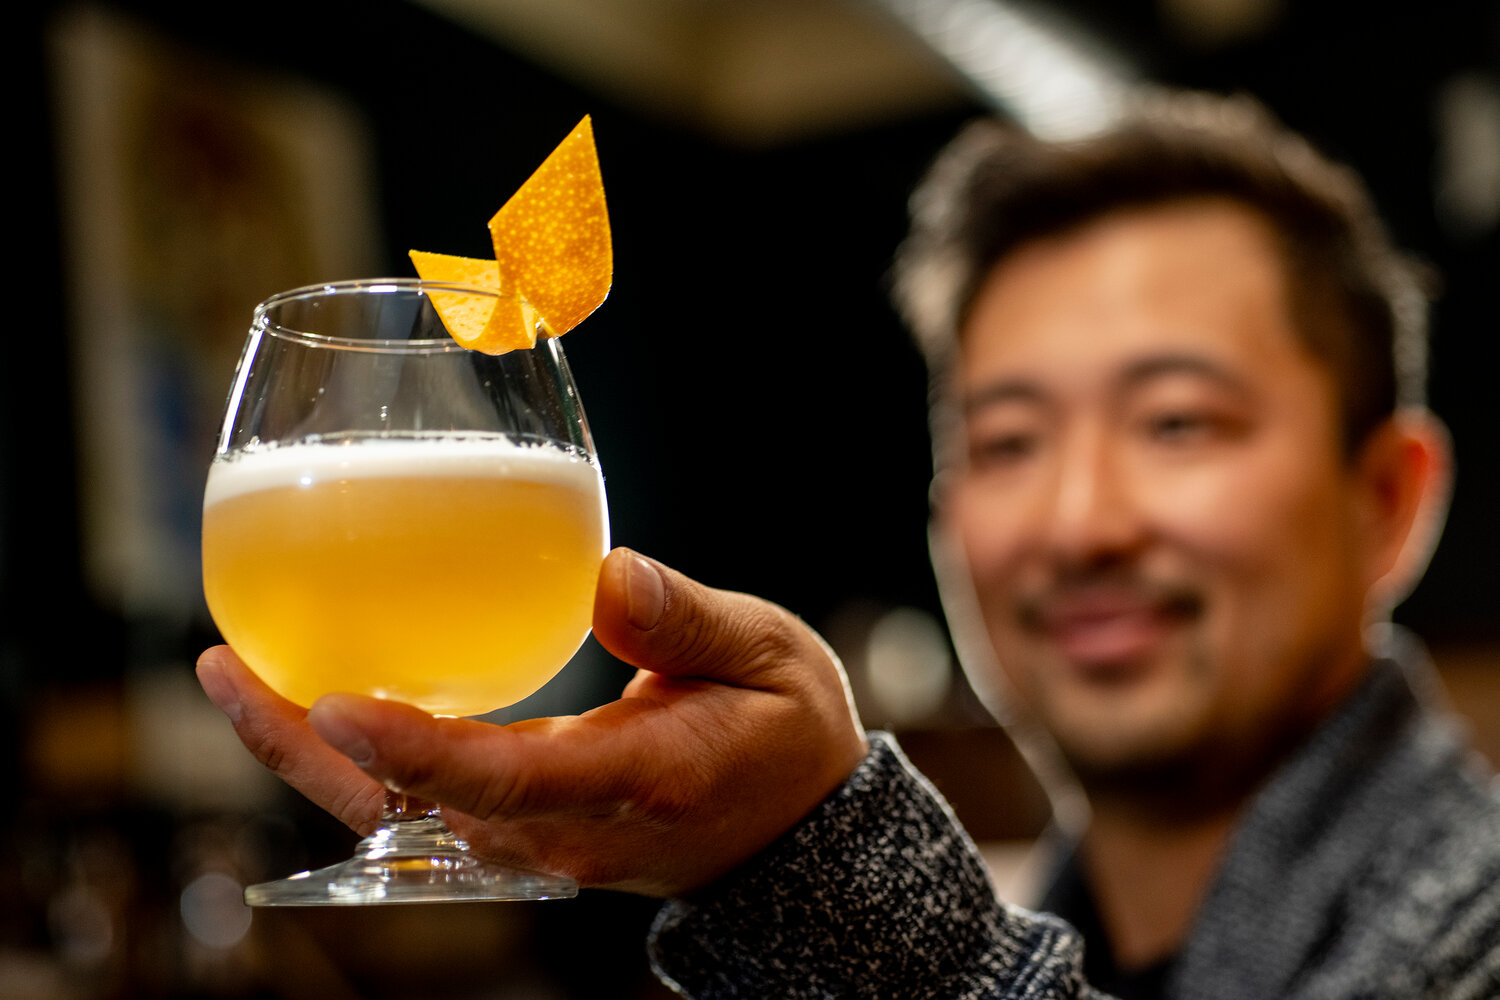 Josh Choi calls his drink “Sidecar-esque,” a reference to the cocktail traditionally made with Cognac, orange liqueur and lemon juice. Hence, the name: Sidekick.